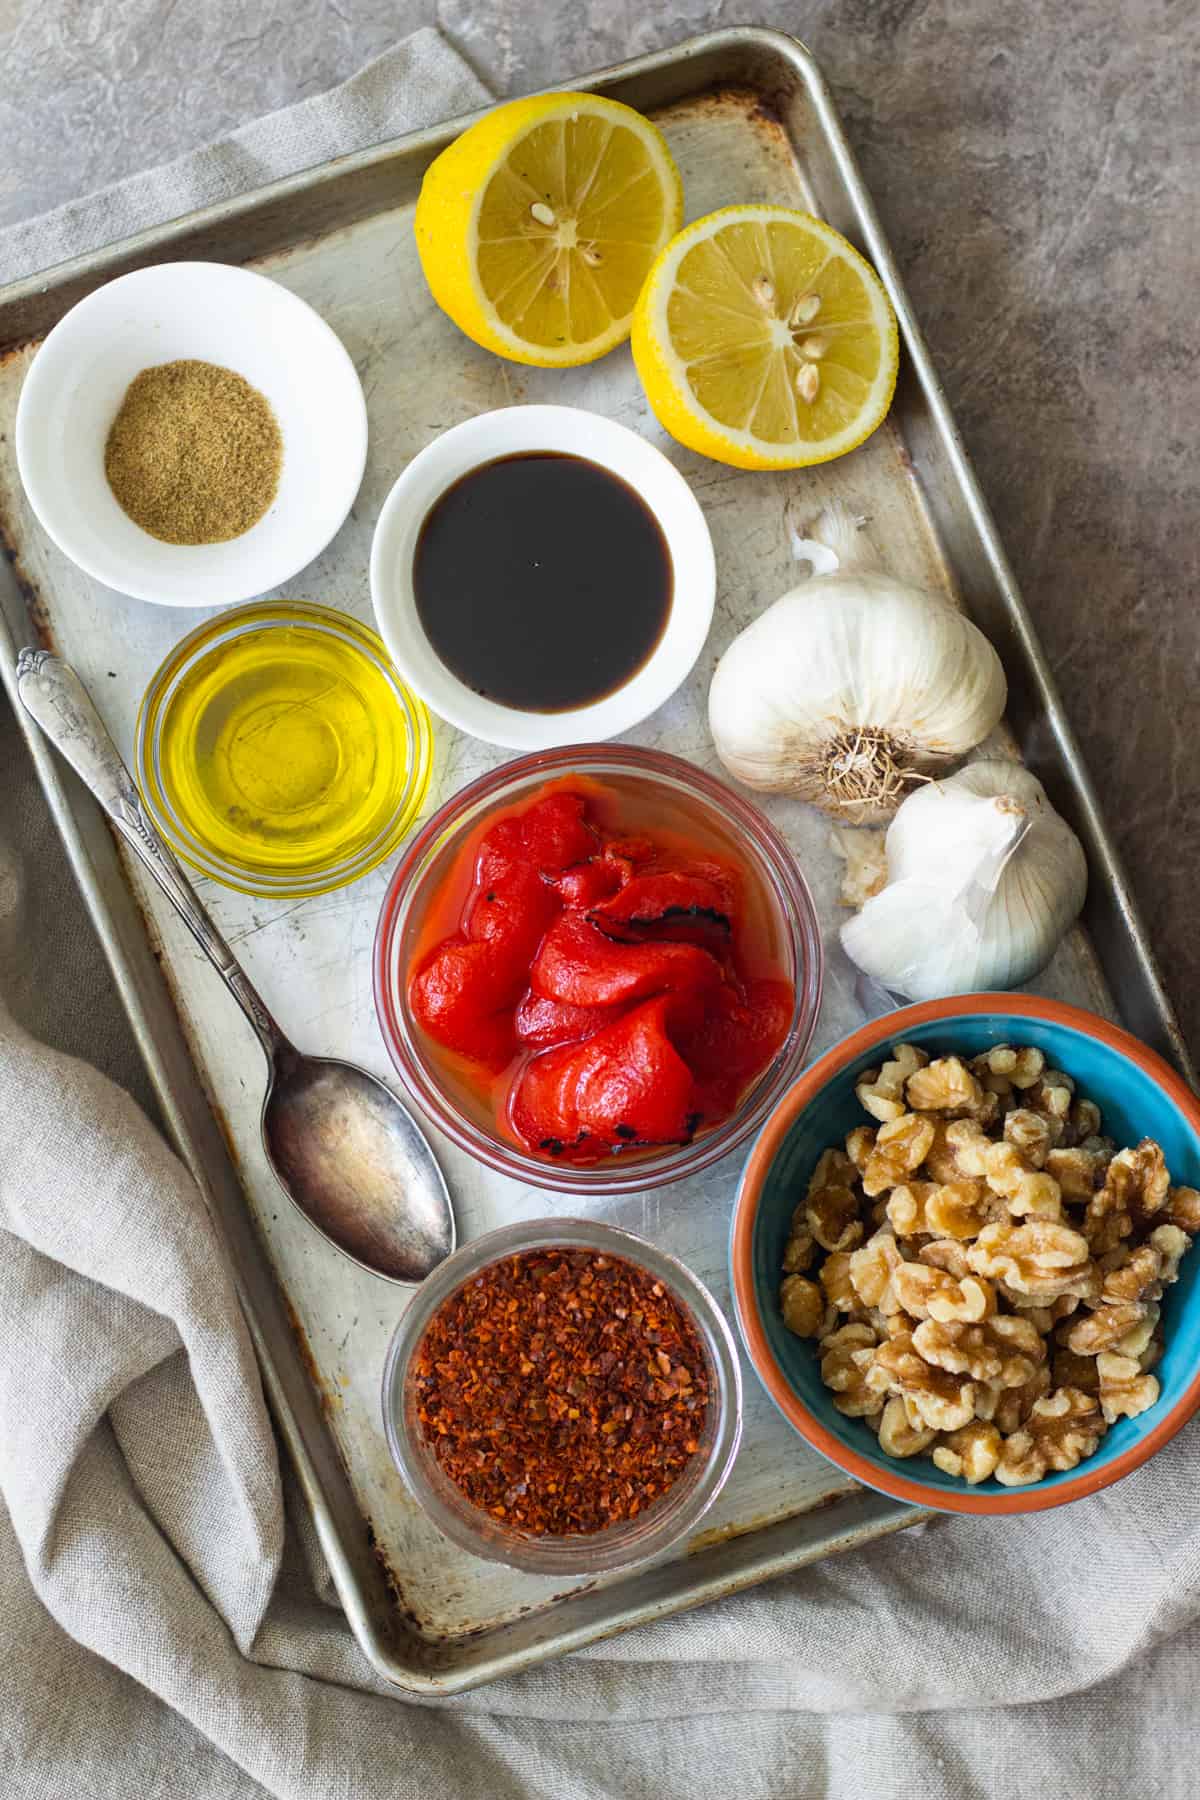 Muhammara ingredients are roasted red pepper, lemon, walnuts, pomegranate molasses, Aleppo pepper, olive oil and cumin and garlic